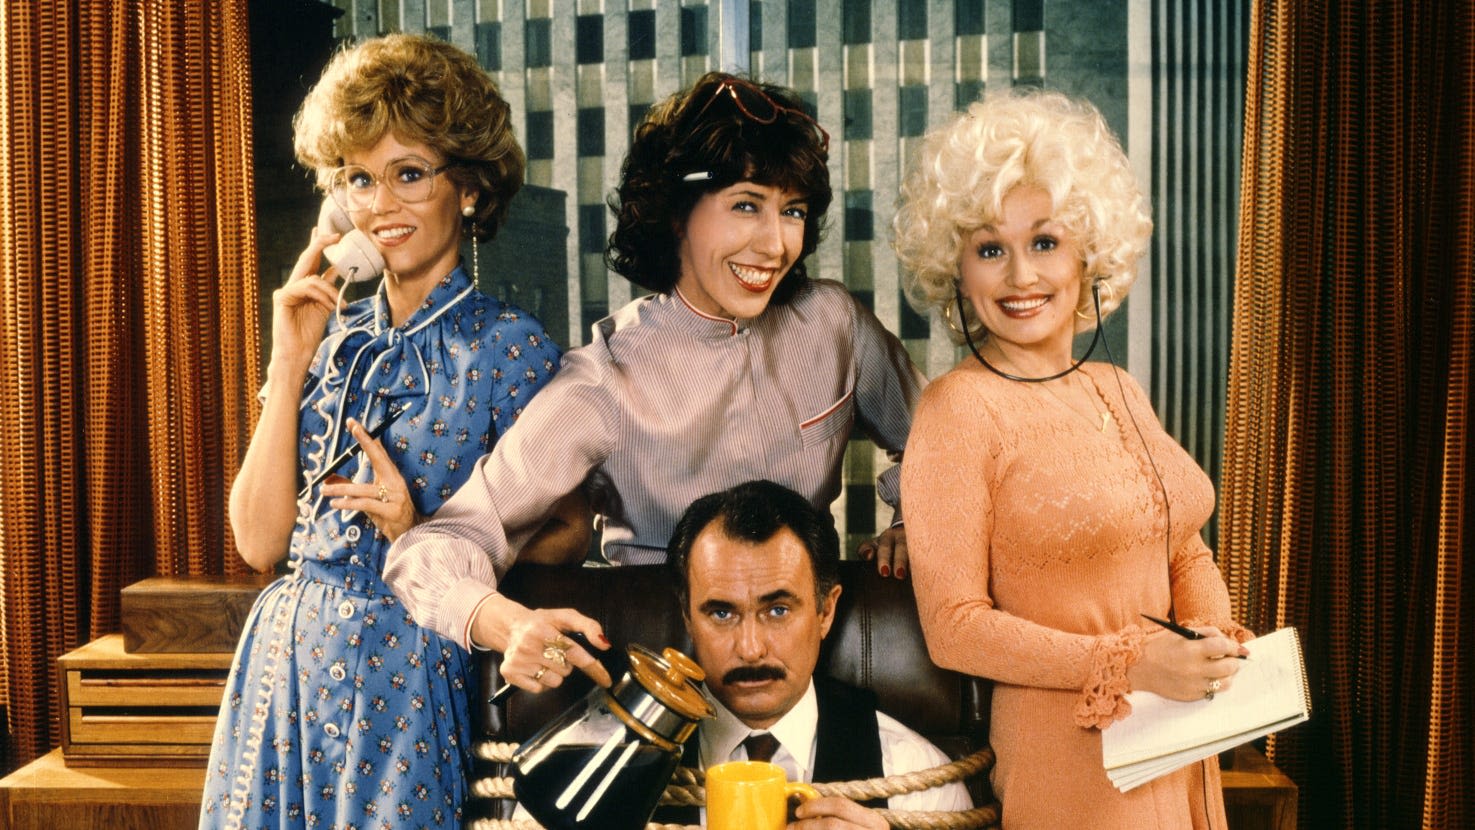 Dolly Parton shares message after death of '9 to 5' co-star Dabney Coleman: 'I will miss him greatly'